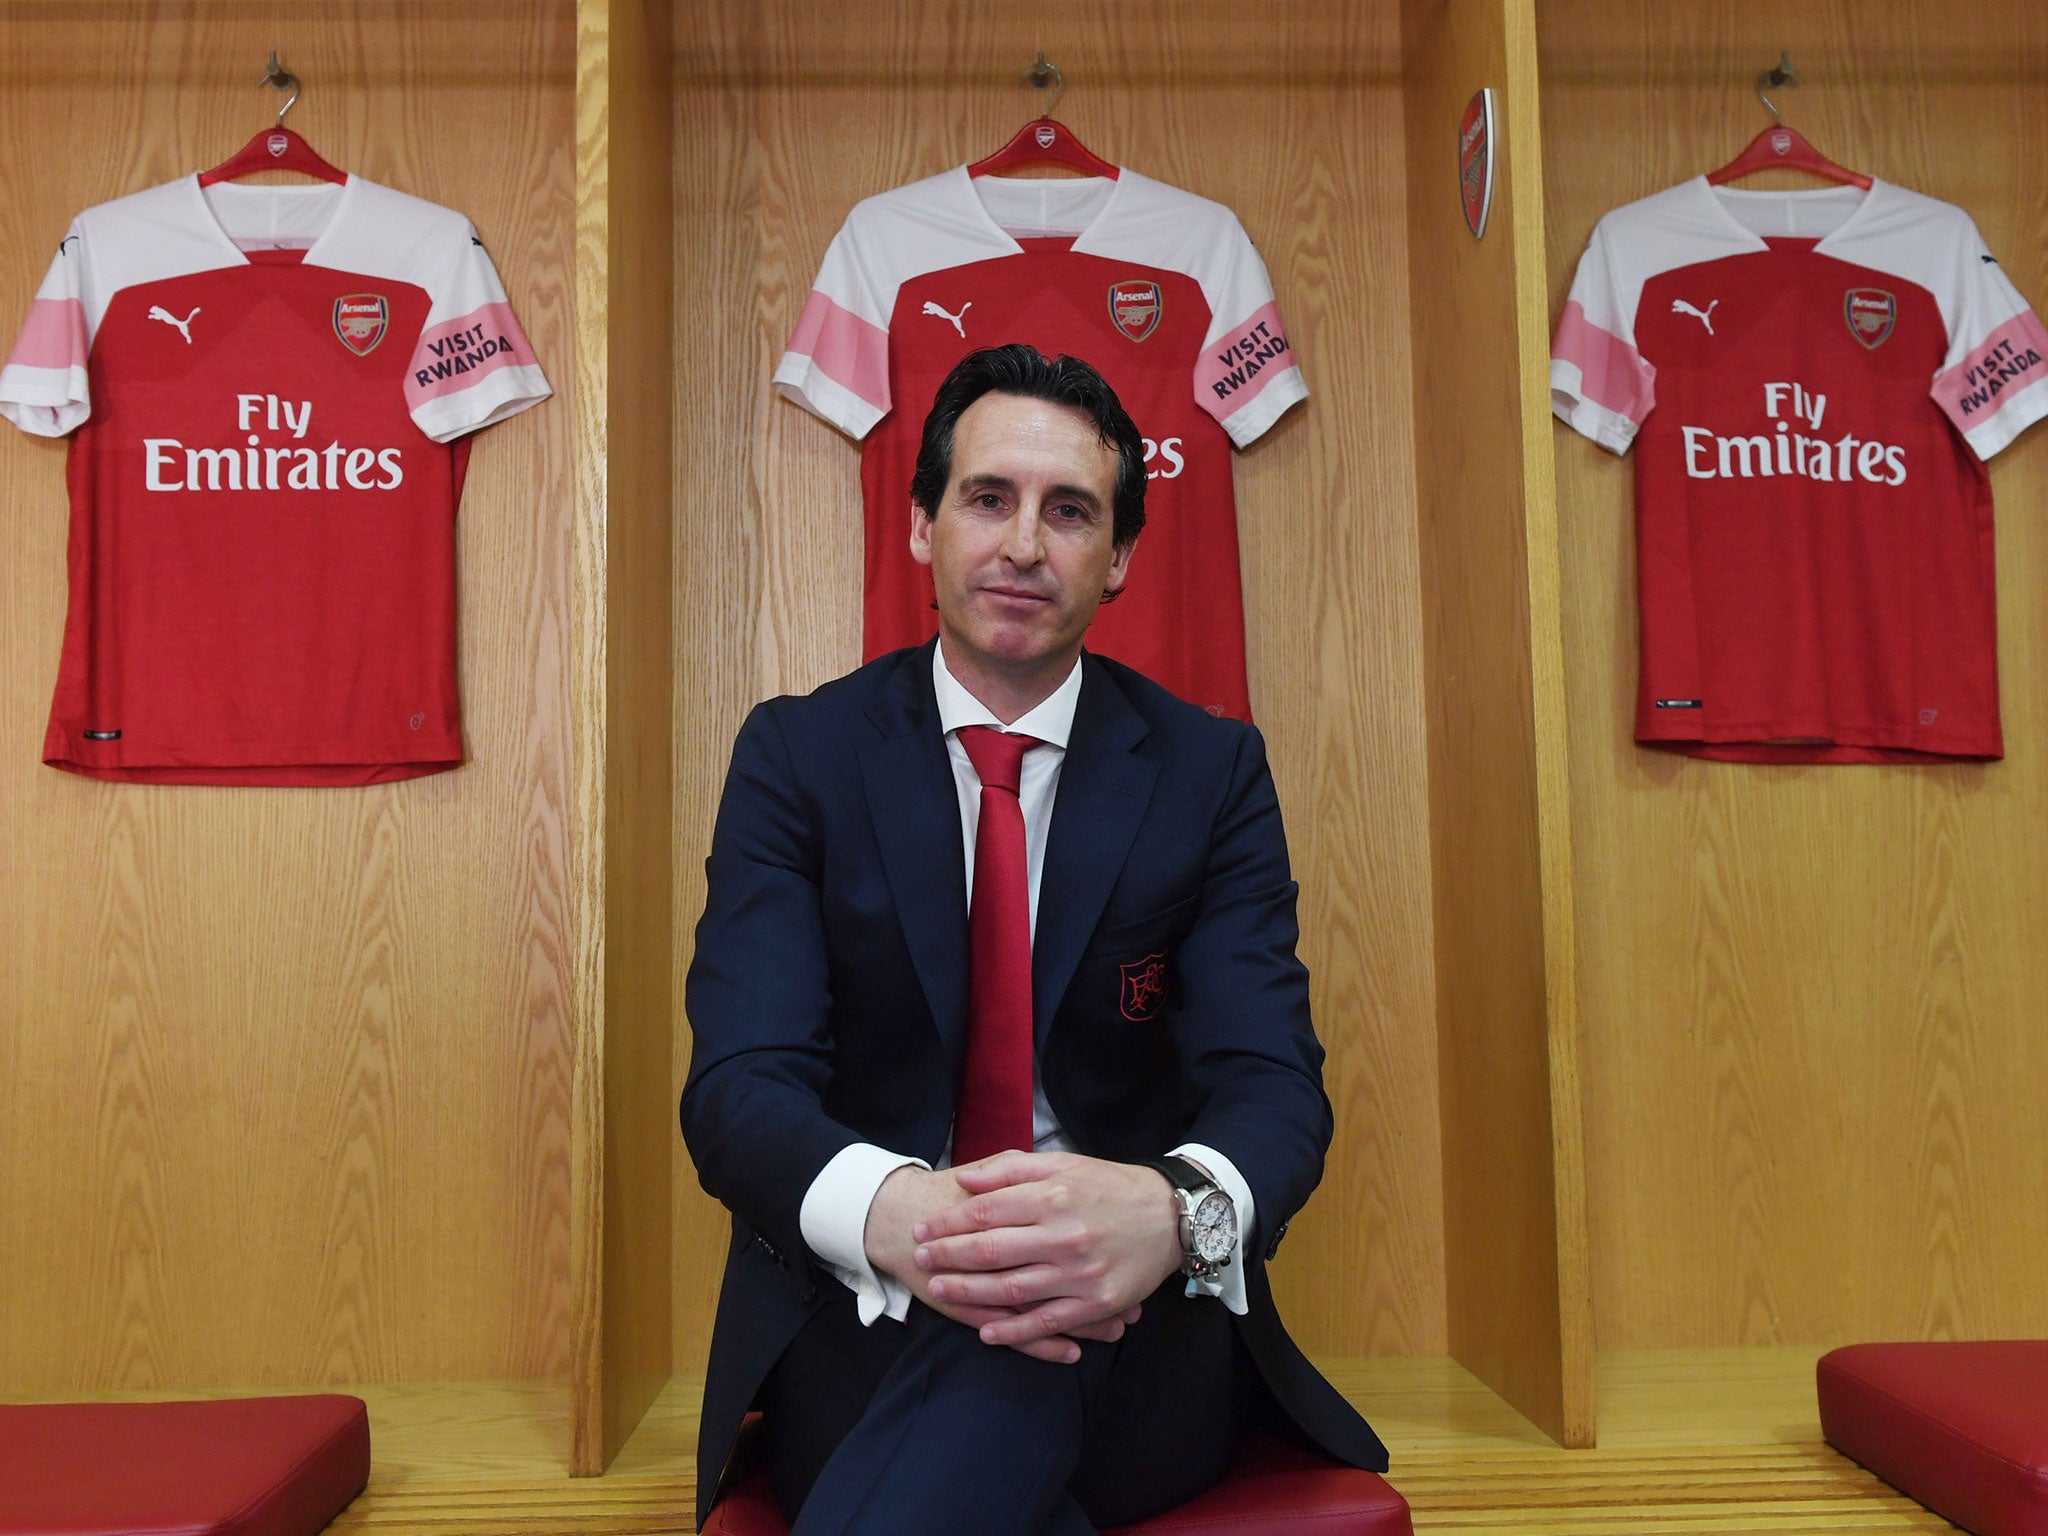 Unai Emery was unveiled as Arsenal's new head coach on Wednesday afternoon